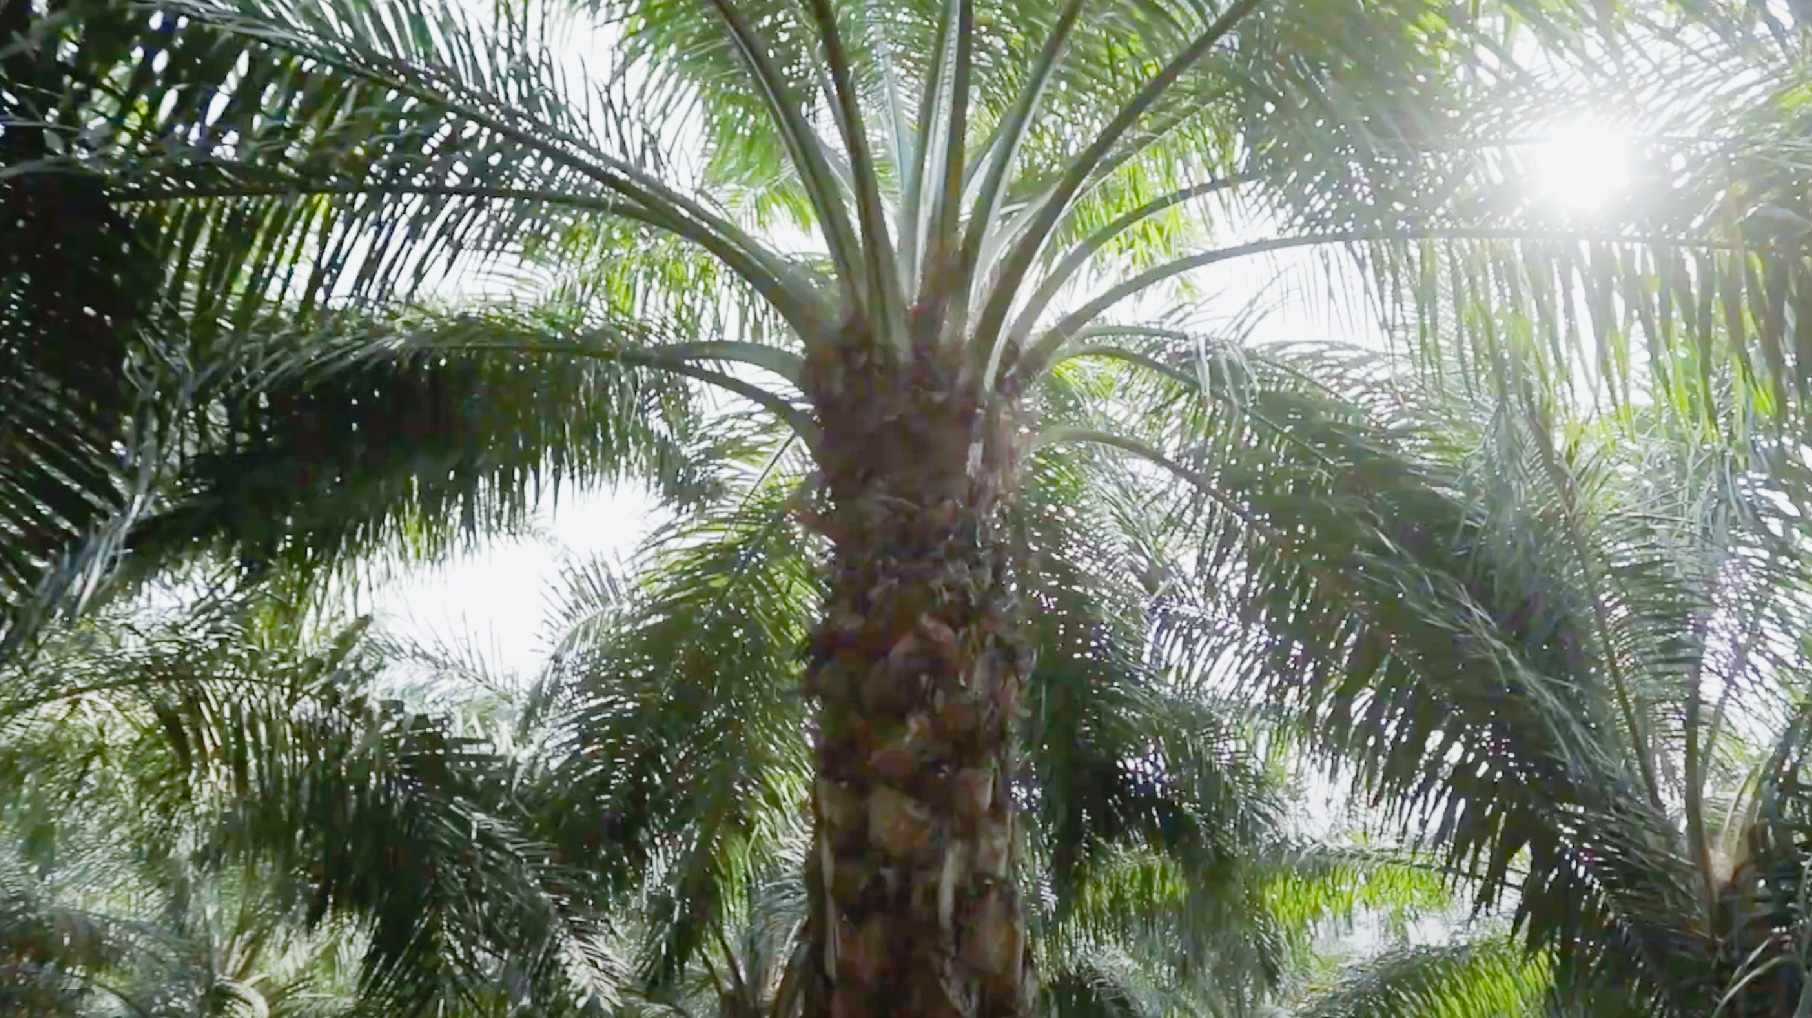 The self-sustainable palm oil plant video